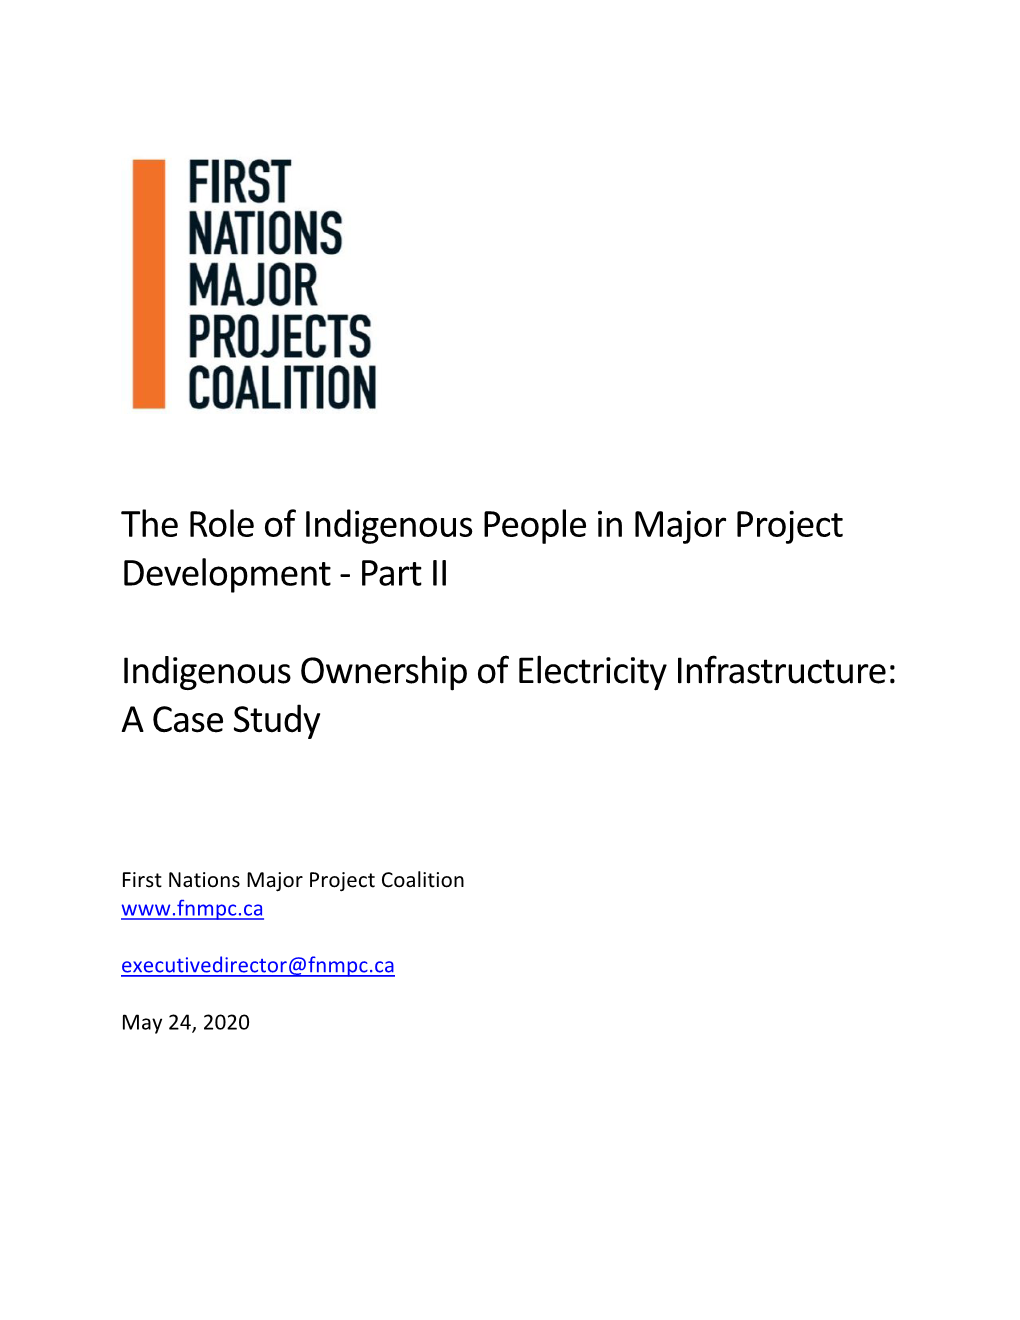 Part II Indigenous Ownership of Electricity Infrastructure